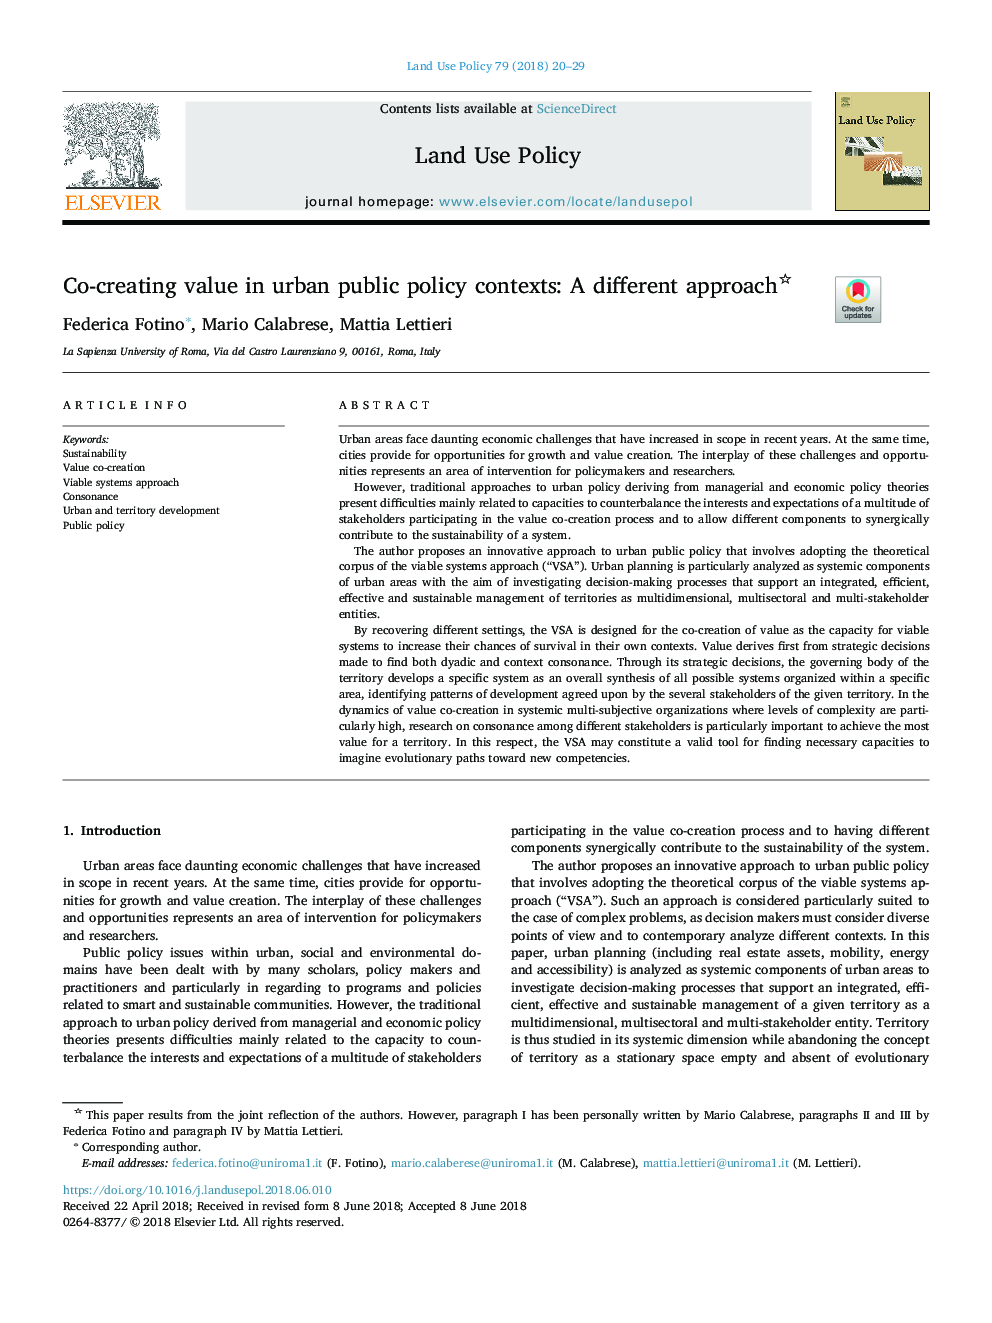 Co-creating value in urban public policy contexts: A different approach